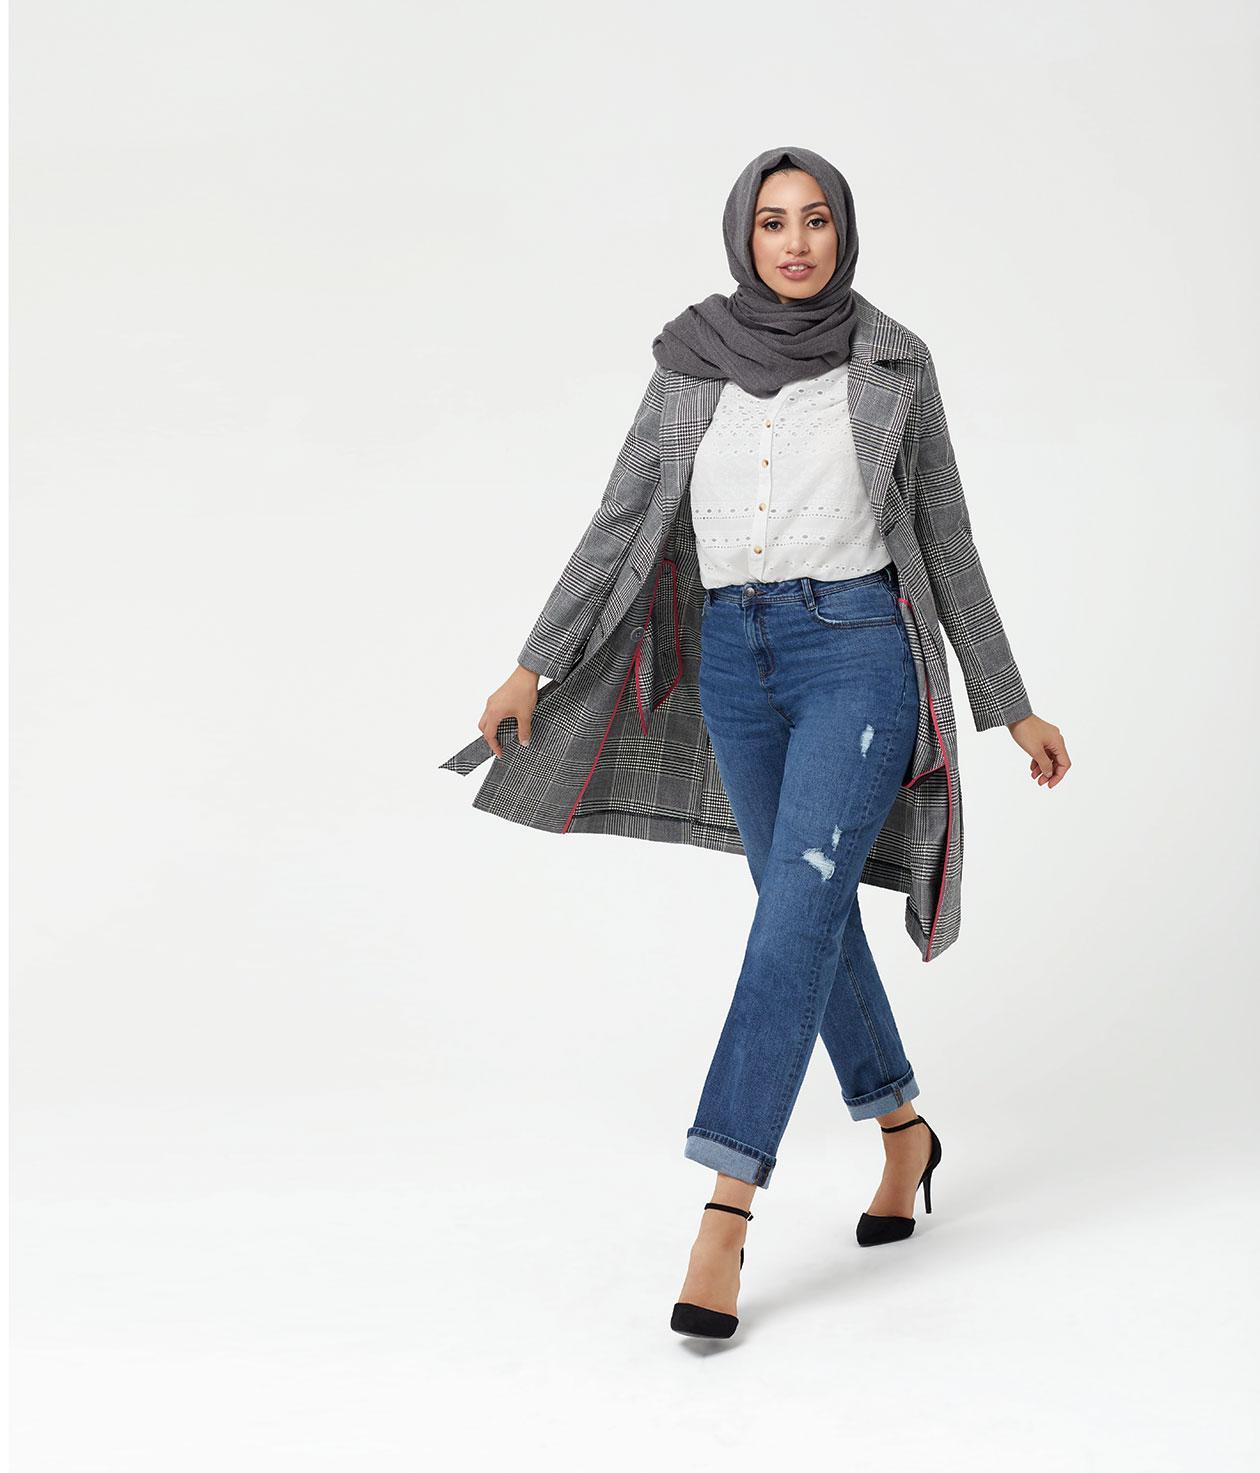 Zahra, one of the interviewees, in one of her modelling shots (George for Asda)